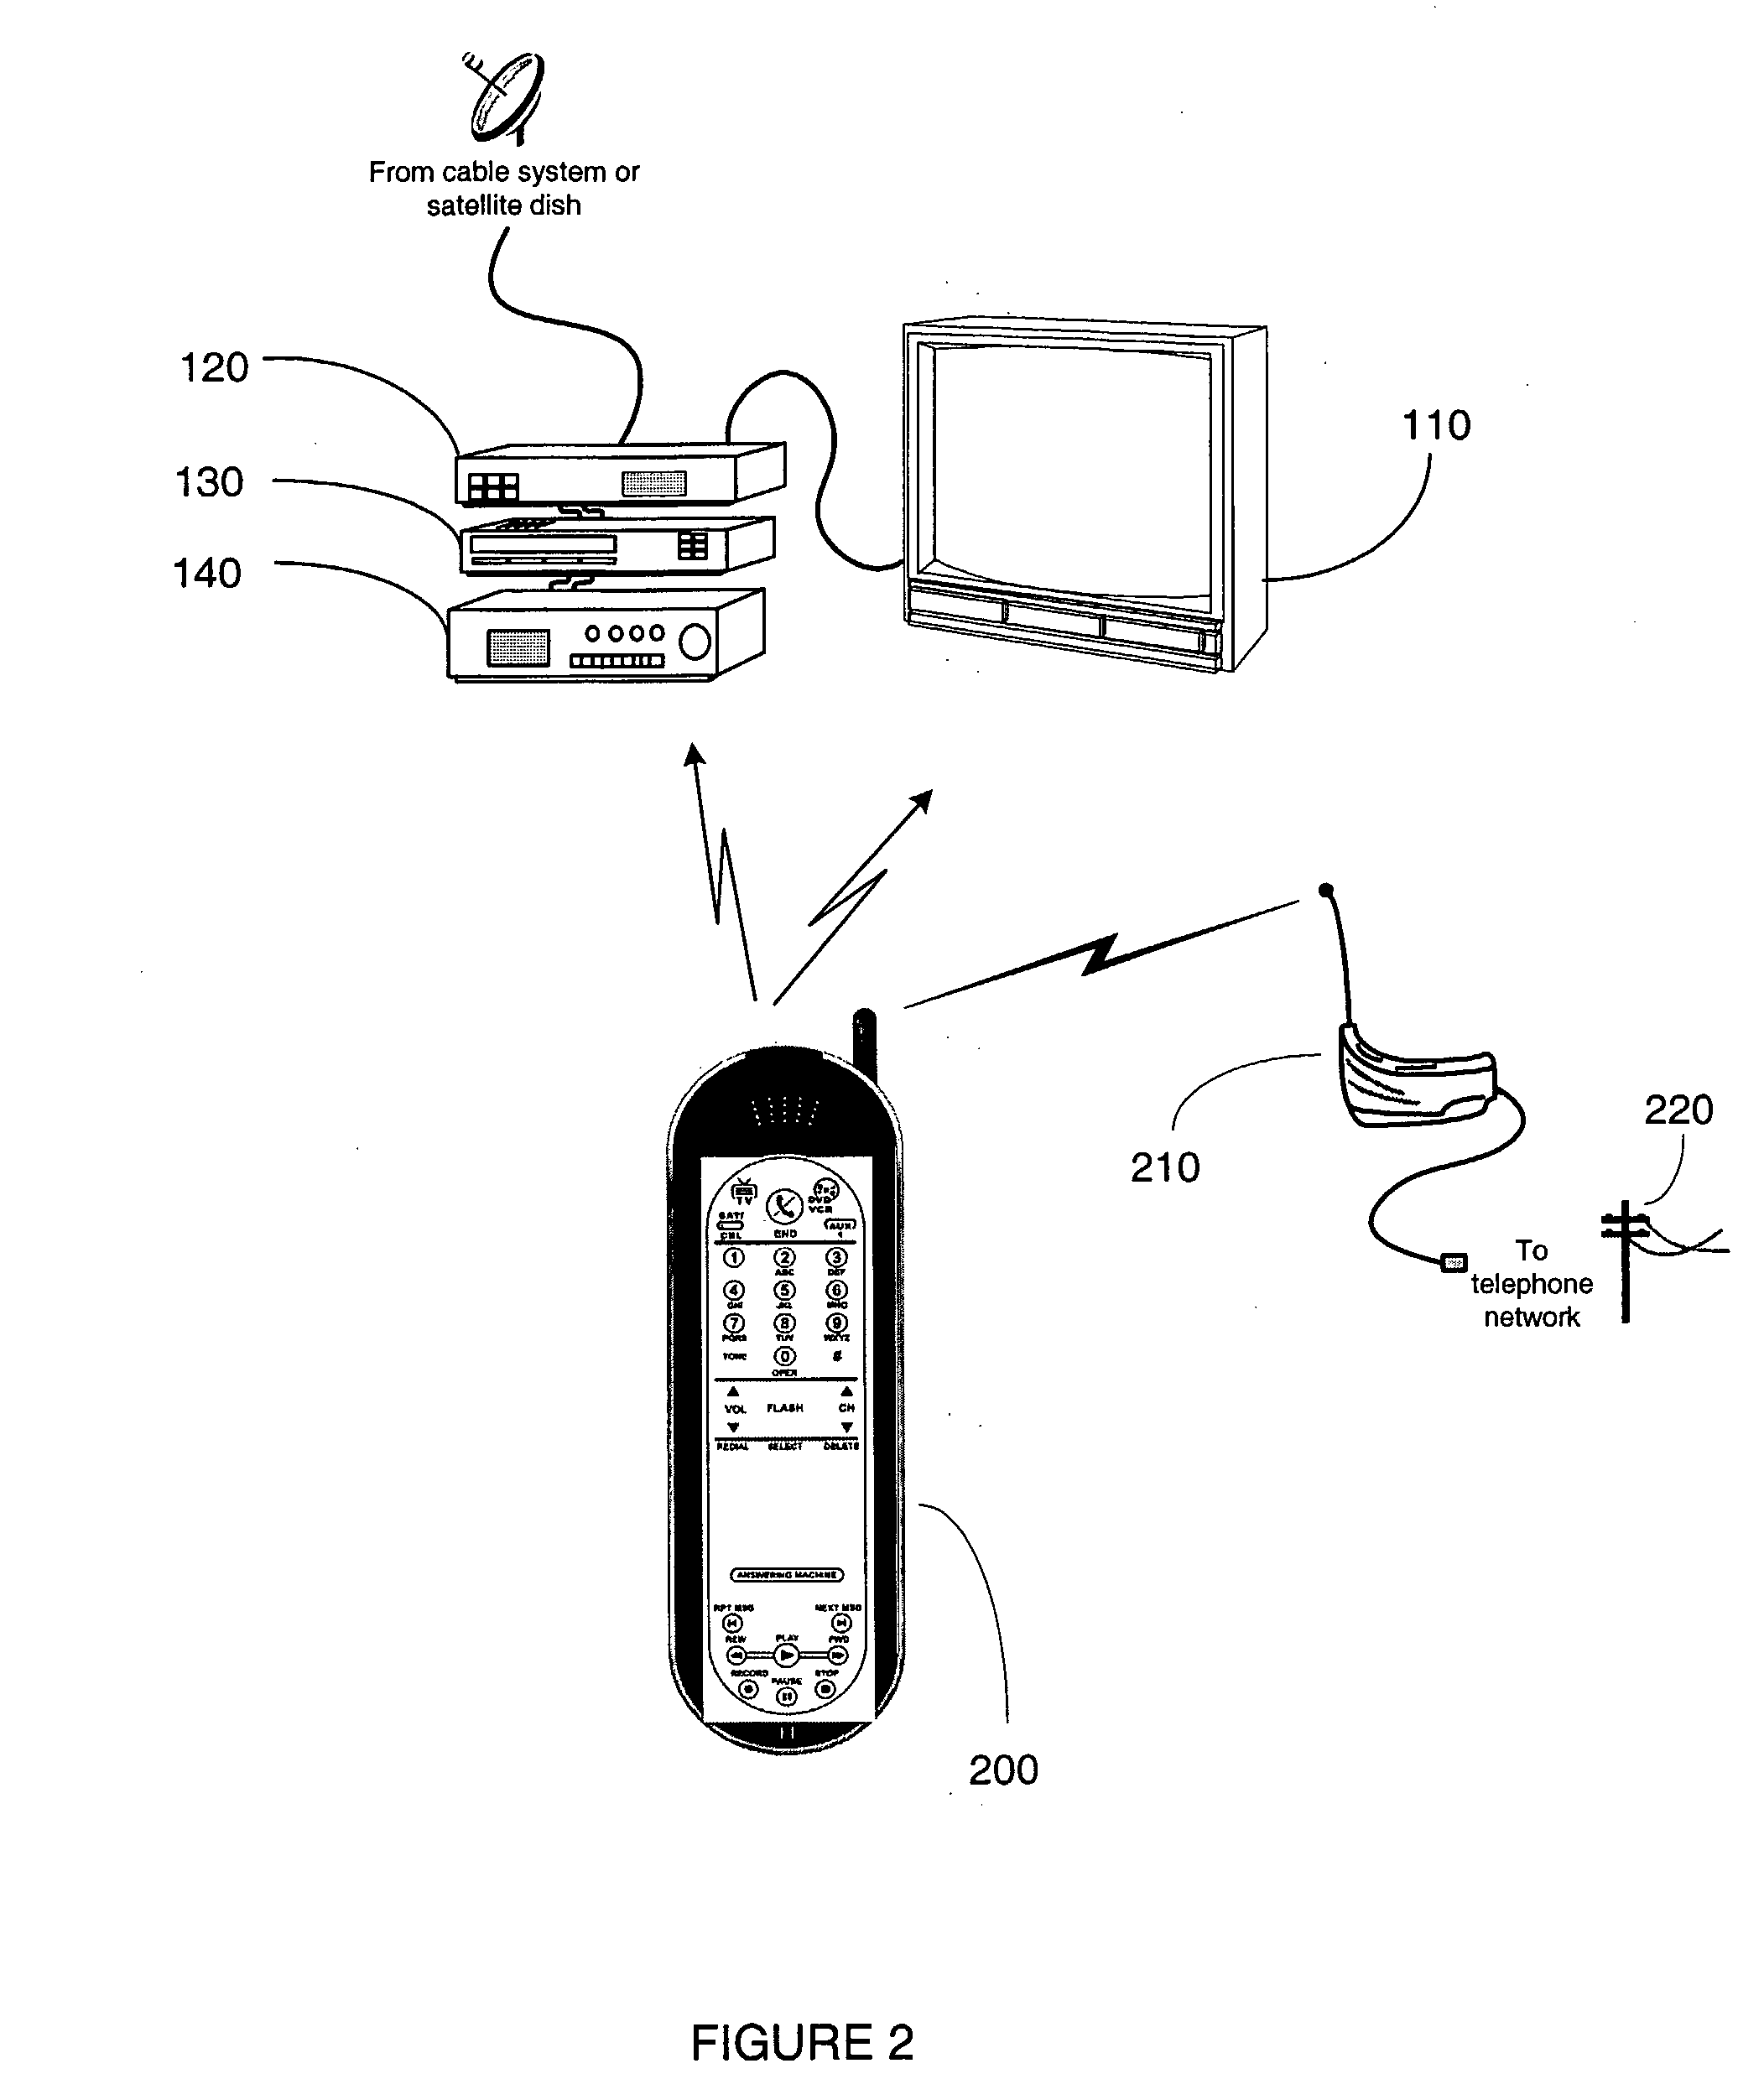 Universal Remote Control or Universal Remote Control/Telephone Combination with Touch Operaed User Interface Having Tactile Feedback